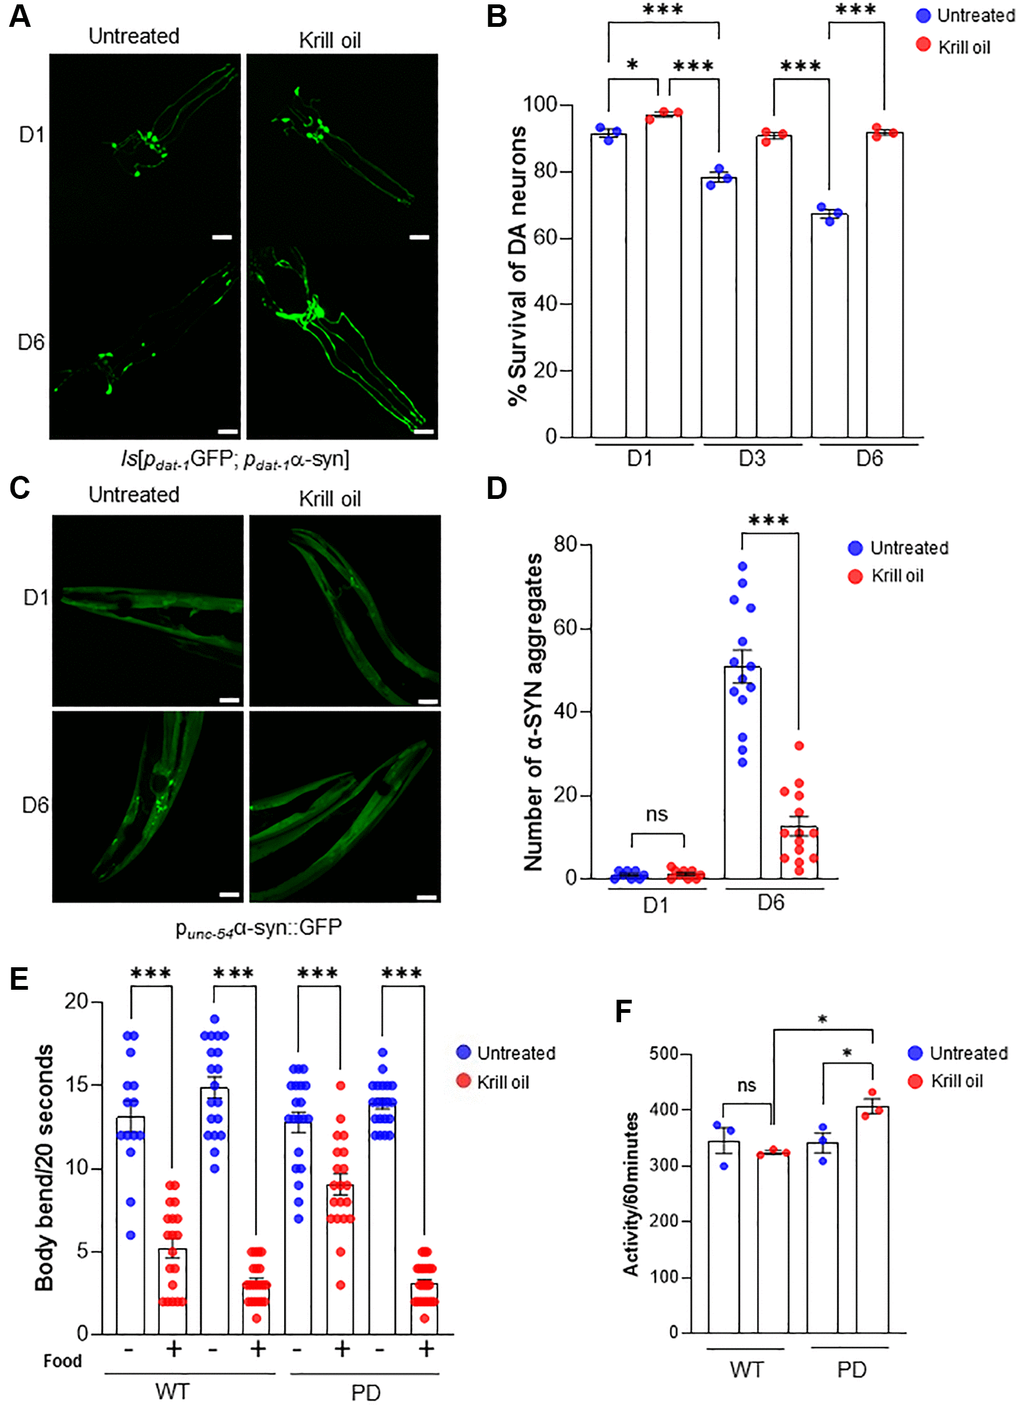 Krill oil promotes healthy dopaminergic neuronal aging. (A) Representative images of the head region of PD animals at day 1, day 3 and day 6 of adulthood, Scale bar, 20 μm. (B) Survival of anterior CEPs and ADEs DA neurons during aging in response to Krill oil (n = 35 nematodes per experiment; three independent experiments, s.e.m; ***p C) Representative images of α-SYN aggregation in body wall muscles in day 1 and day 6 animals, Scale bar, 20 μm. (D) The number of aggregates in day 1 and day 6 animals in response to krill oil (n = 15 nematodes, s.e.m; NS and ***p E) Column scatter plot representing basal slowing response of wild type and PD animals at adult day 6. Body bends per 20 second measured on NGM plates with and without bacteria (n = 30; Error bars, s.e.m; ***p F) Column scatter plot representing locomotion activity wild type and PD animals at adult day 6. The activity was scored for 60 minutes (n = 50 animals per experiment; Error bars, s.e.m; NS and *p 